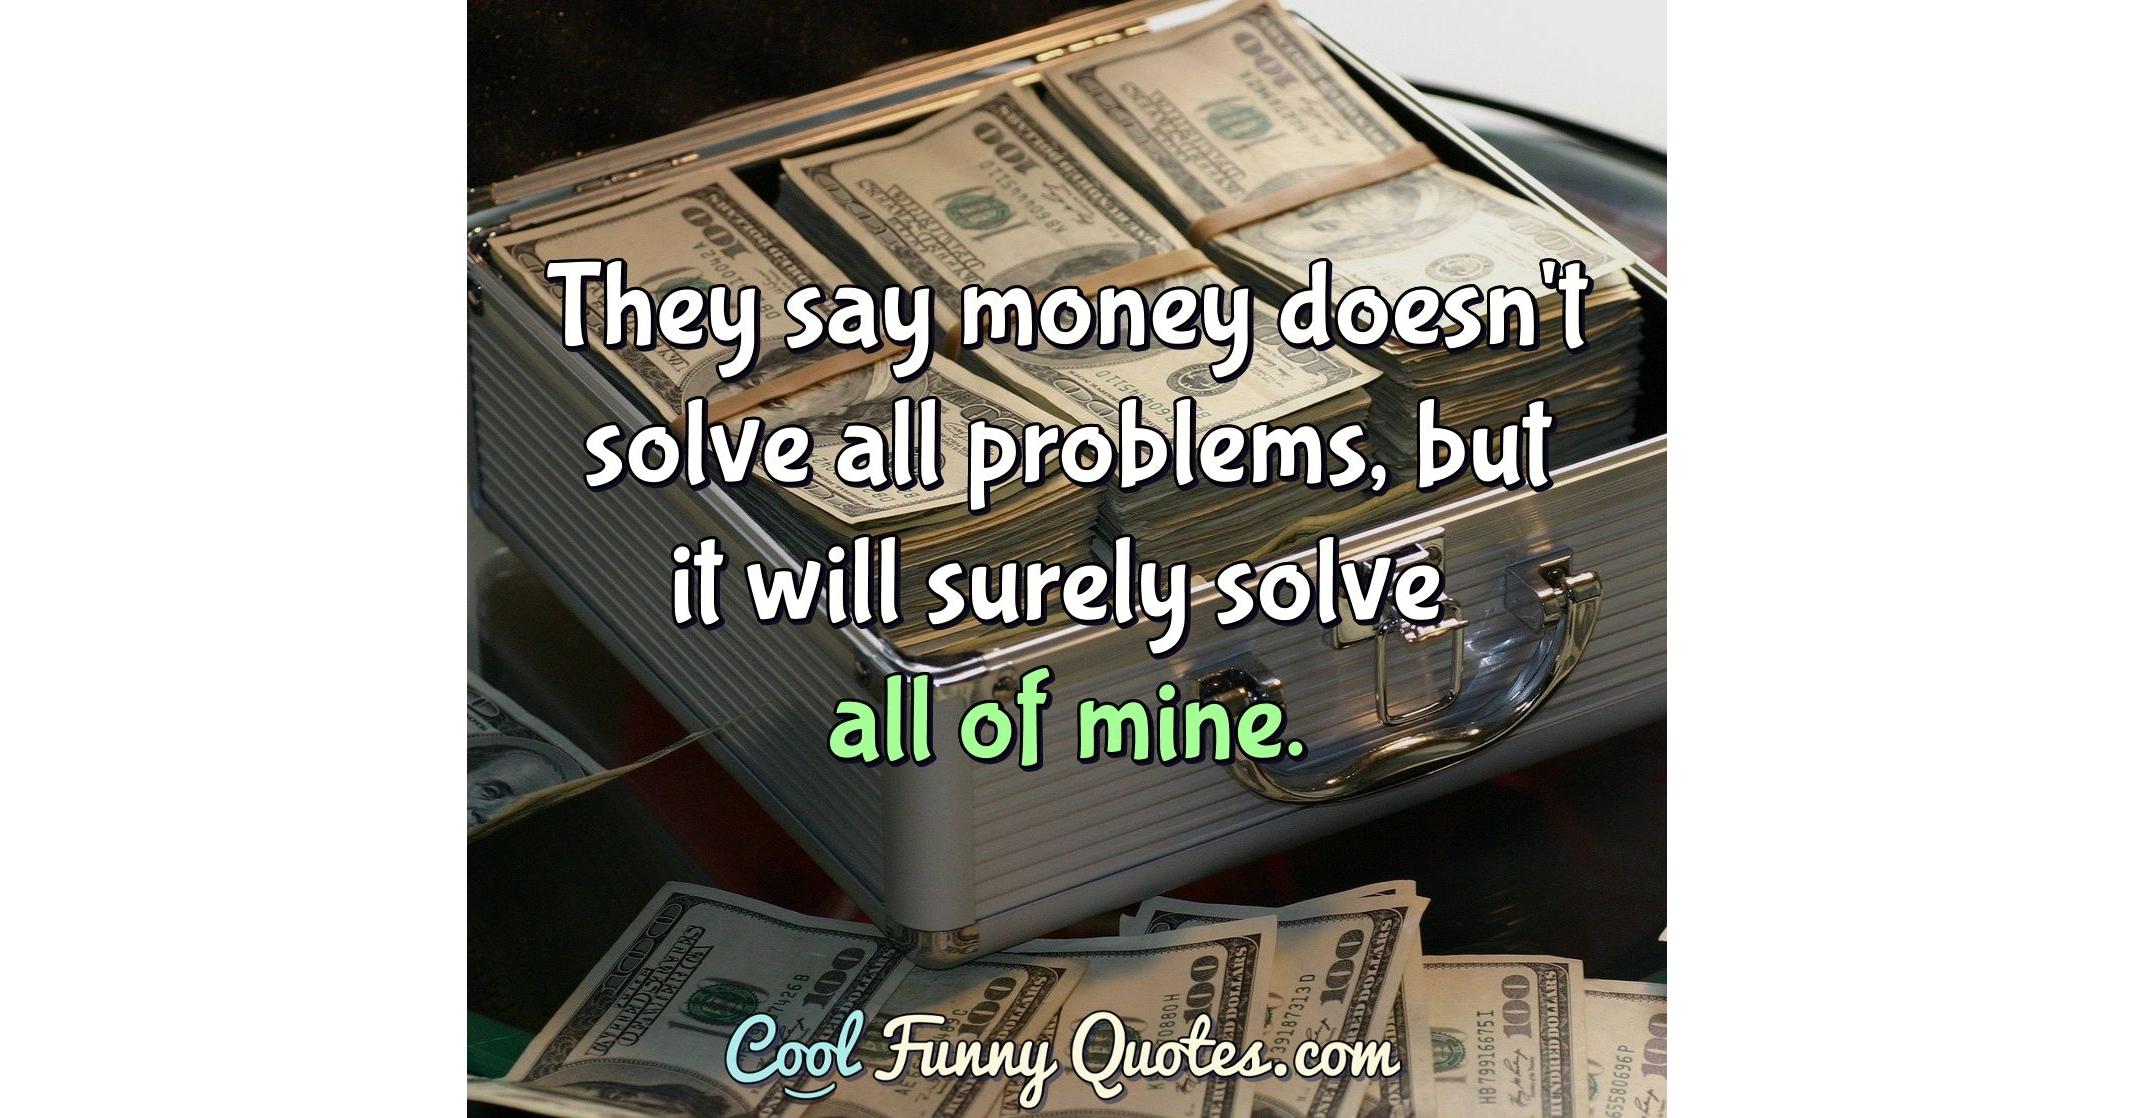 money alone can't solve all problems indirect speech